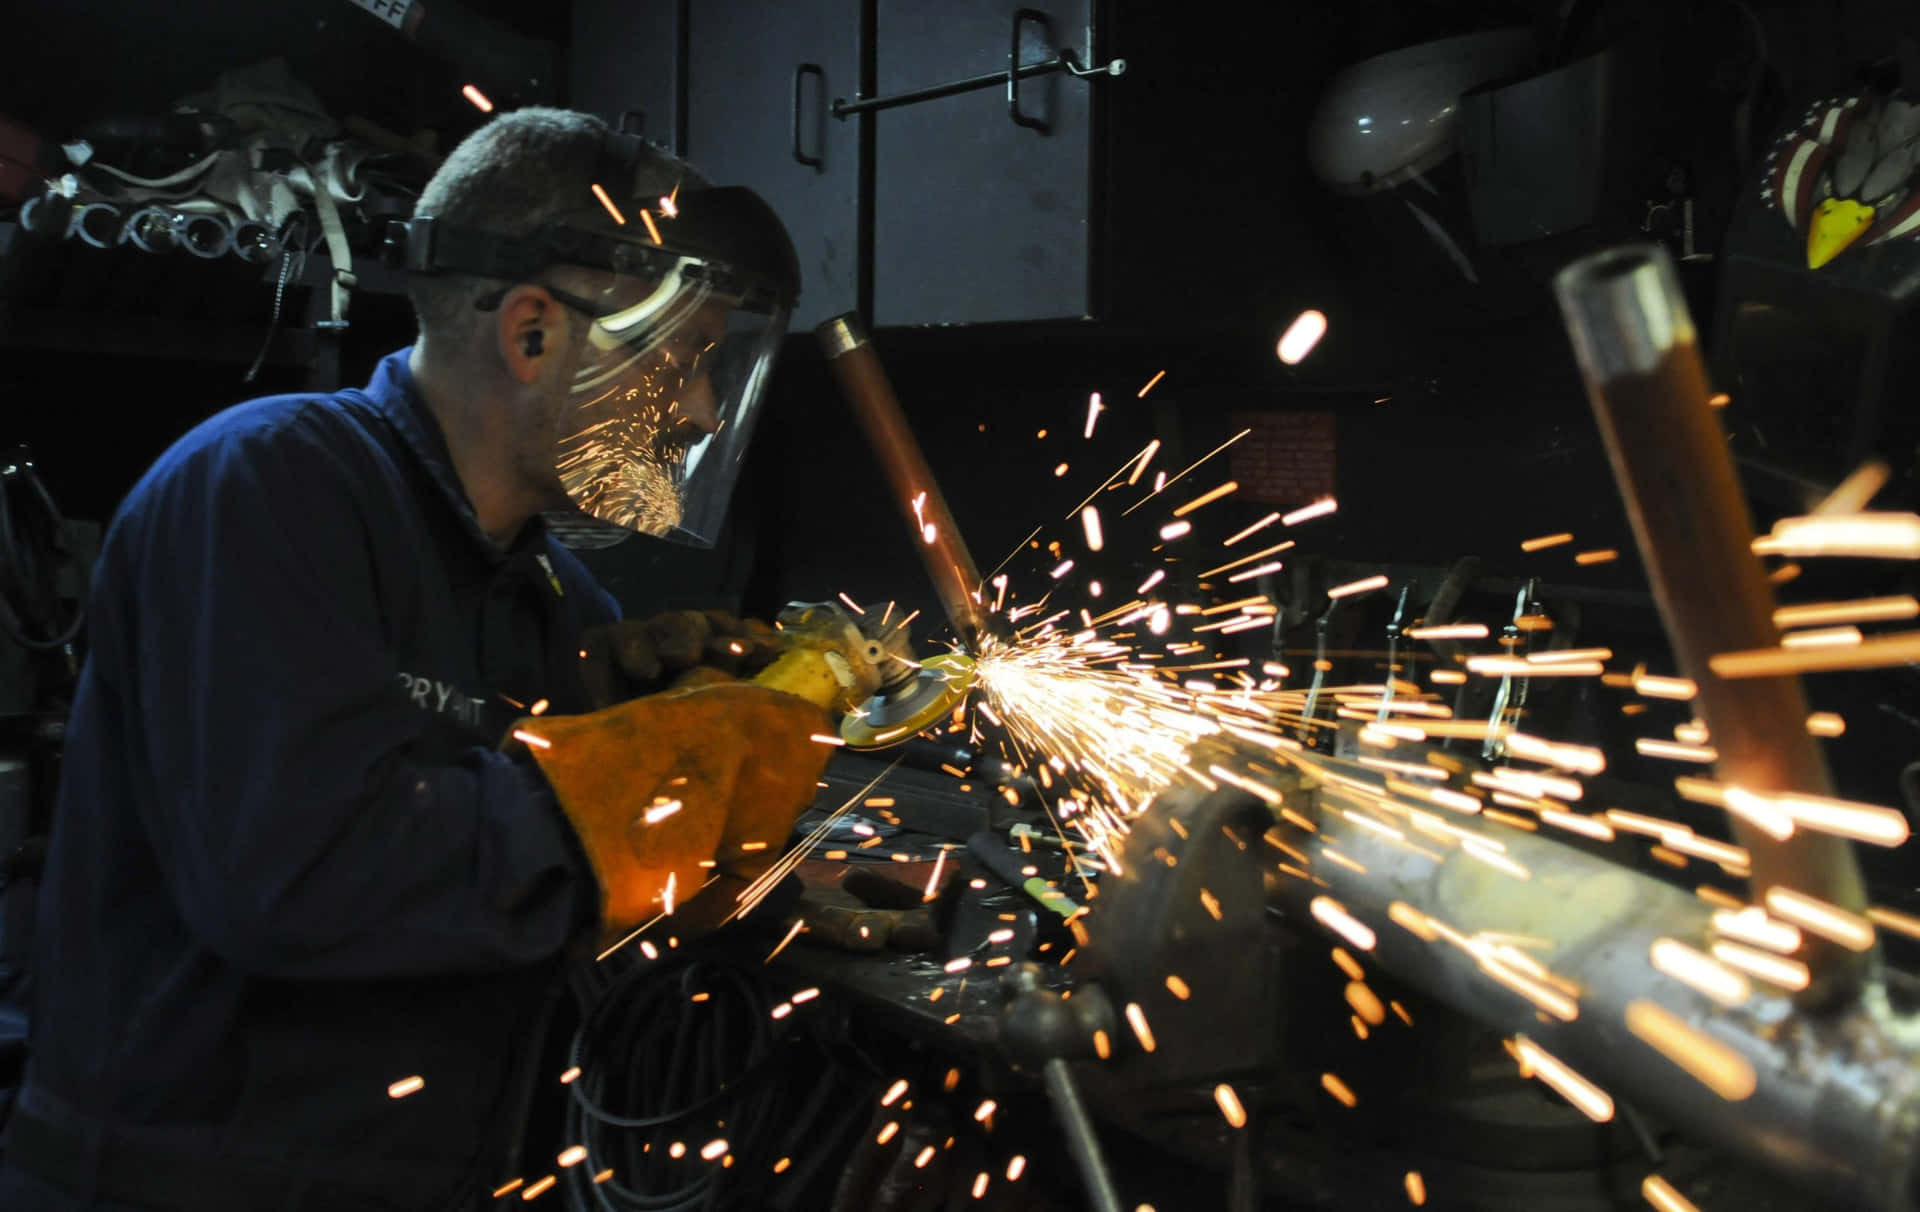 Sparks Fly As Skilled Welder Perfects Welds